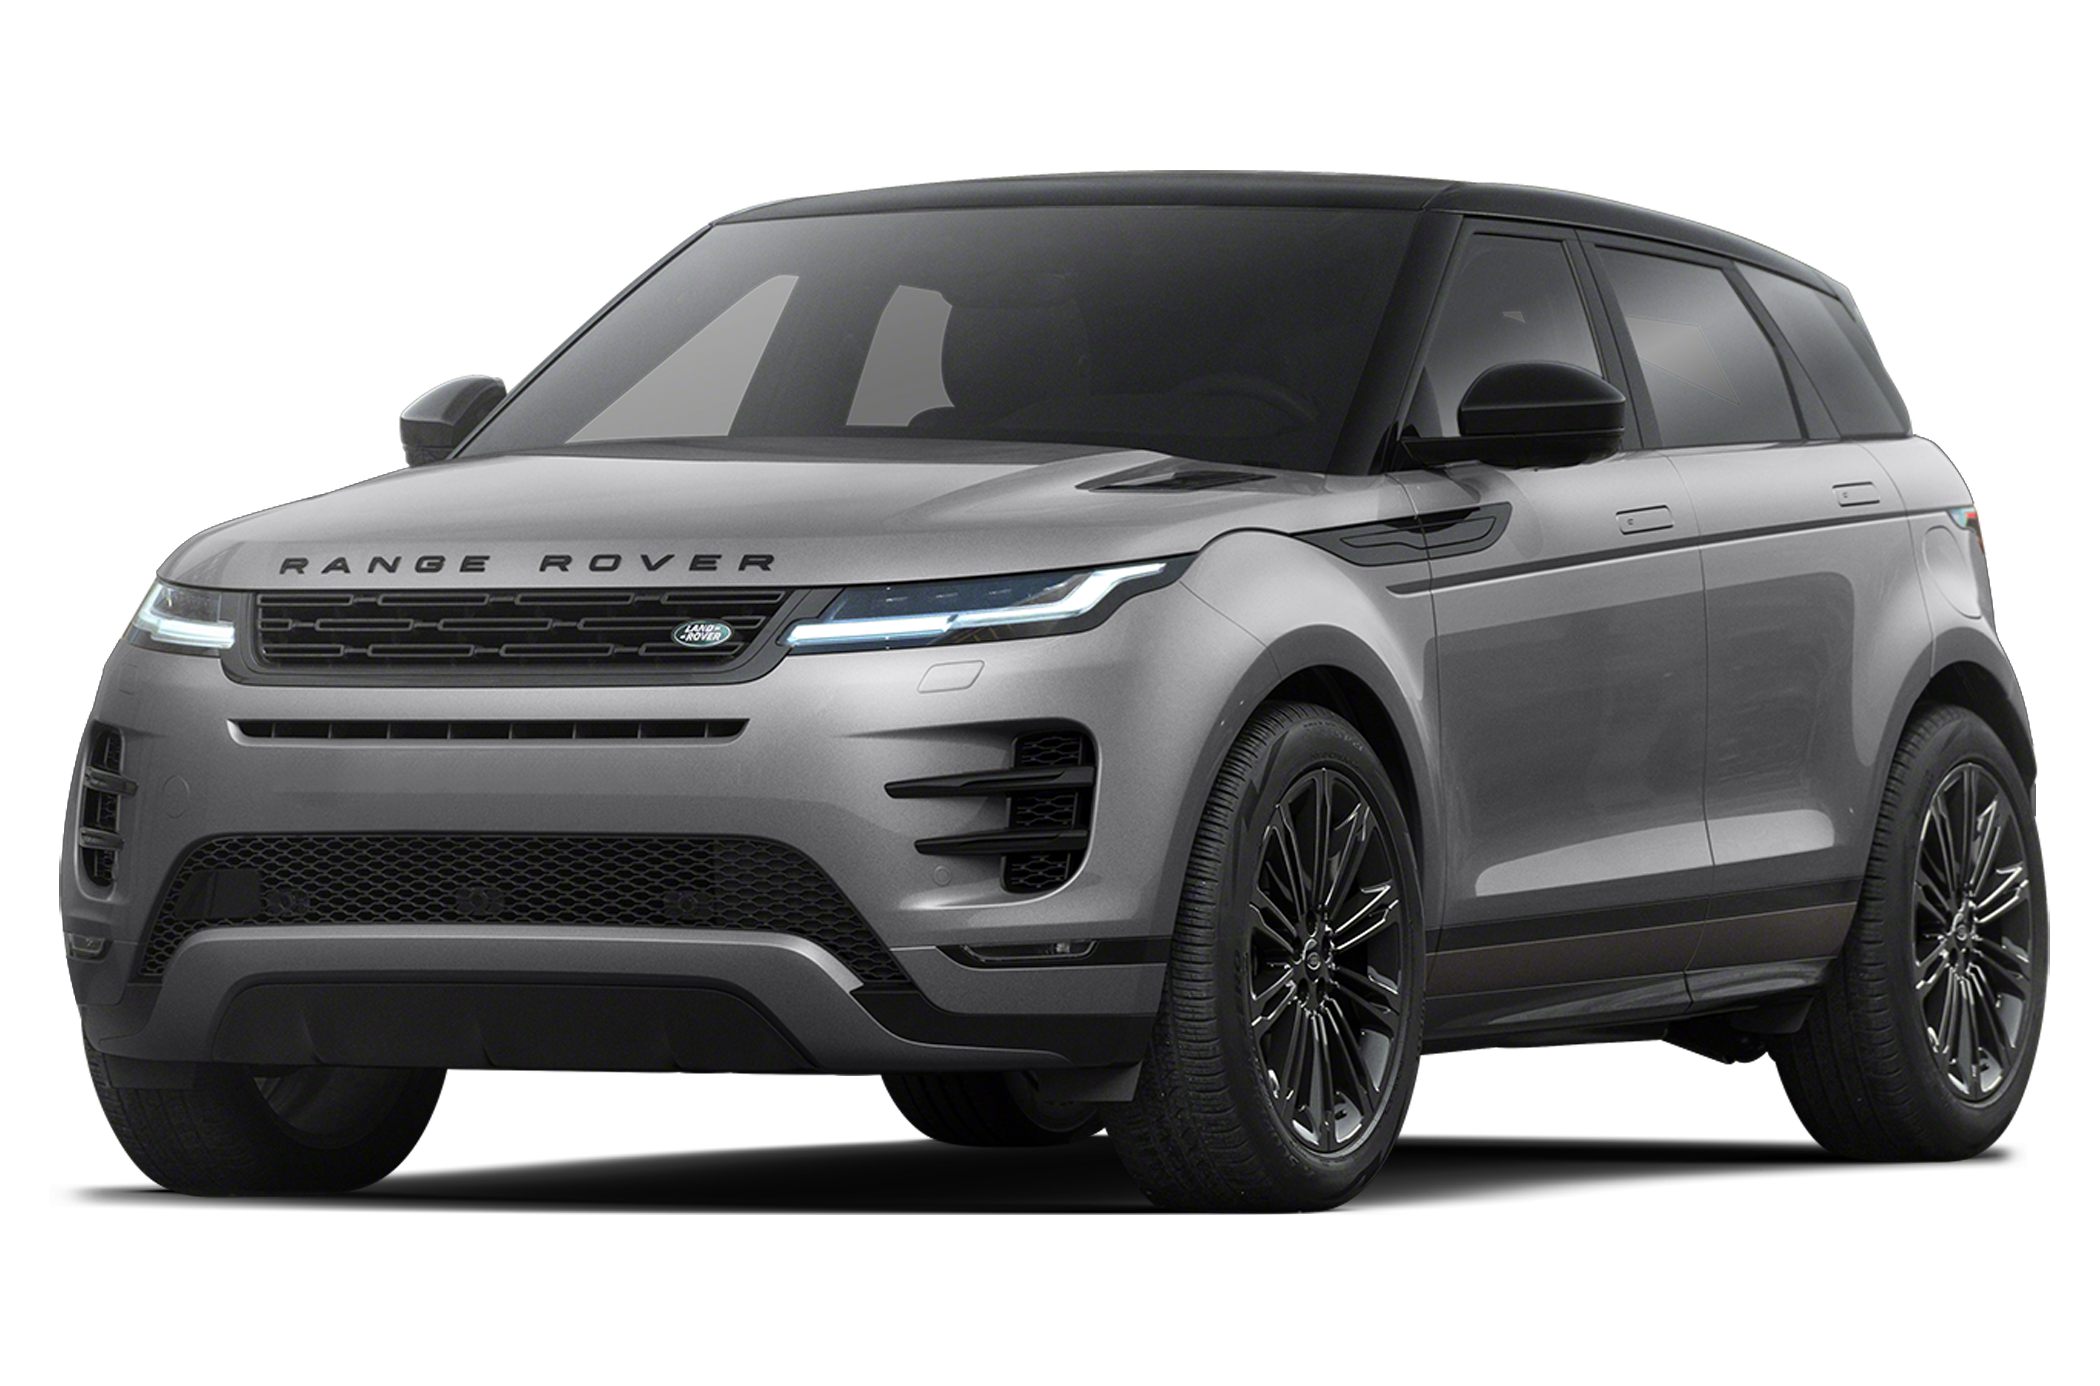 LandWind Evoques Land Rover with X7 crossover in China - Autoblog